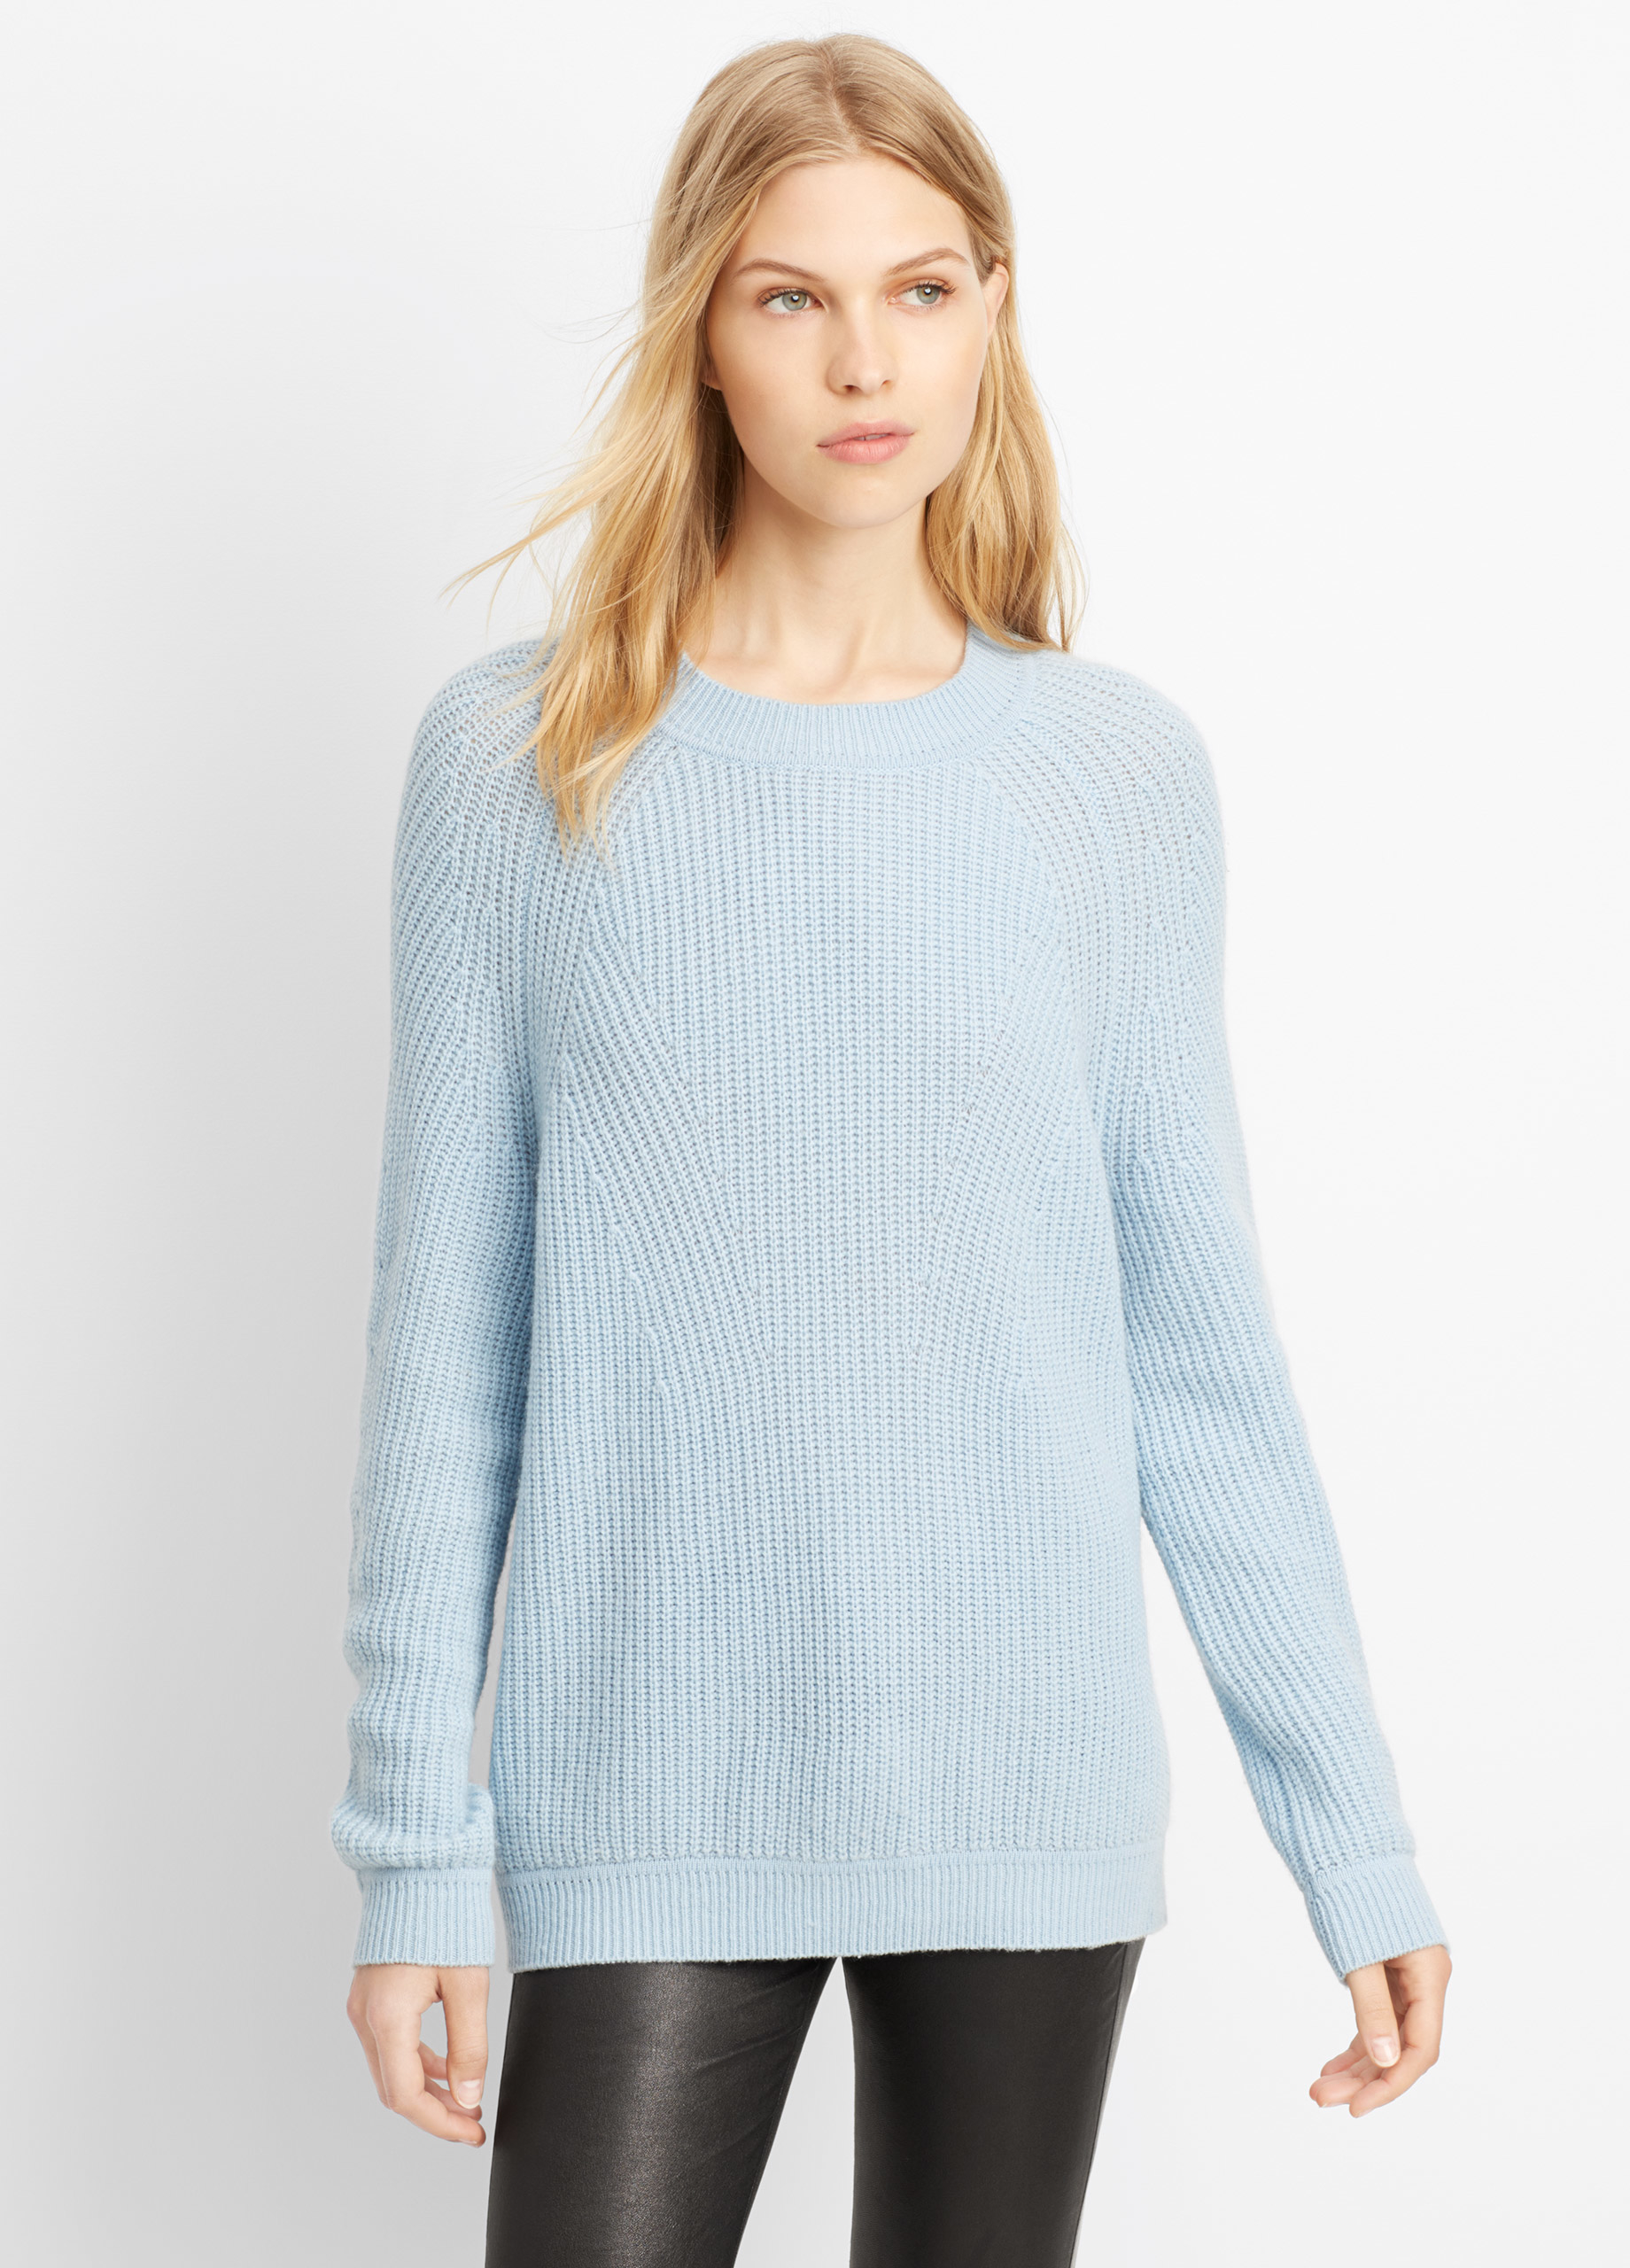 Vince Wool Cashmere Directional Rib Crew Neck Sweater in Blue | Lyst